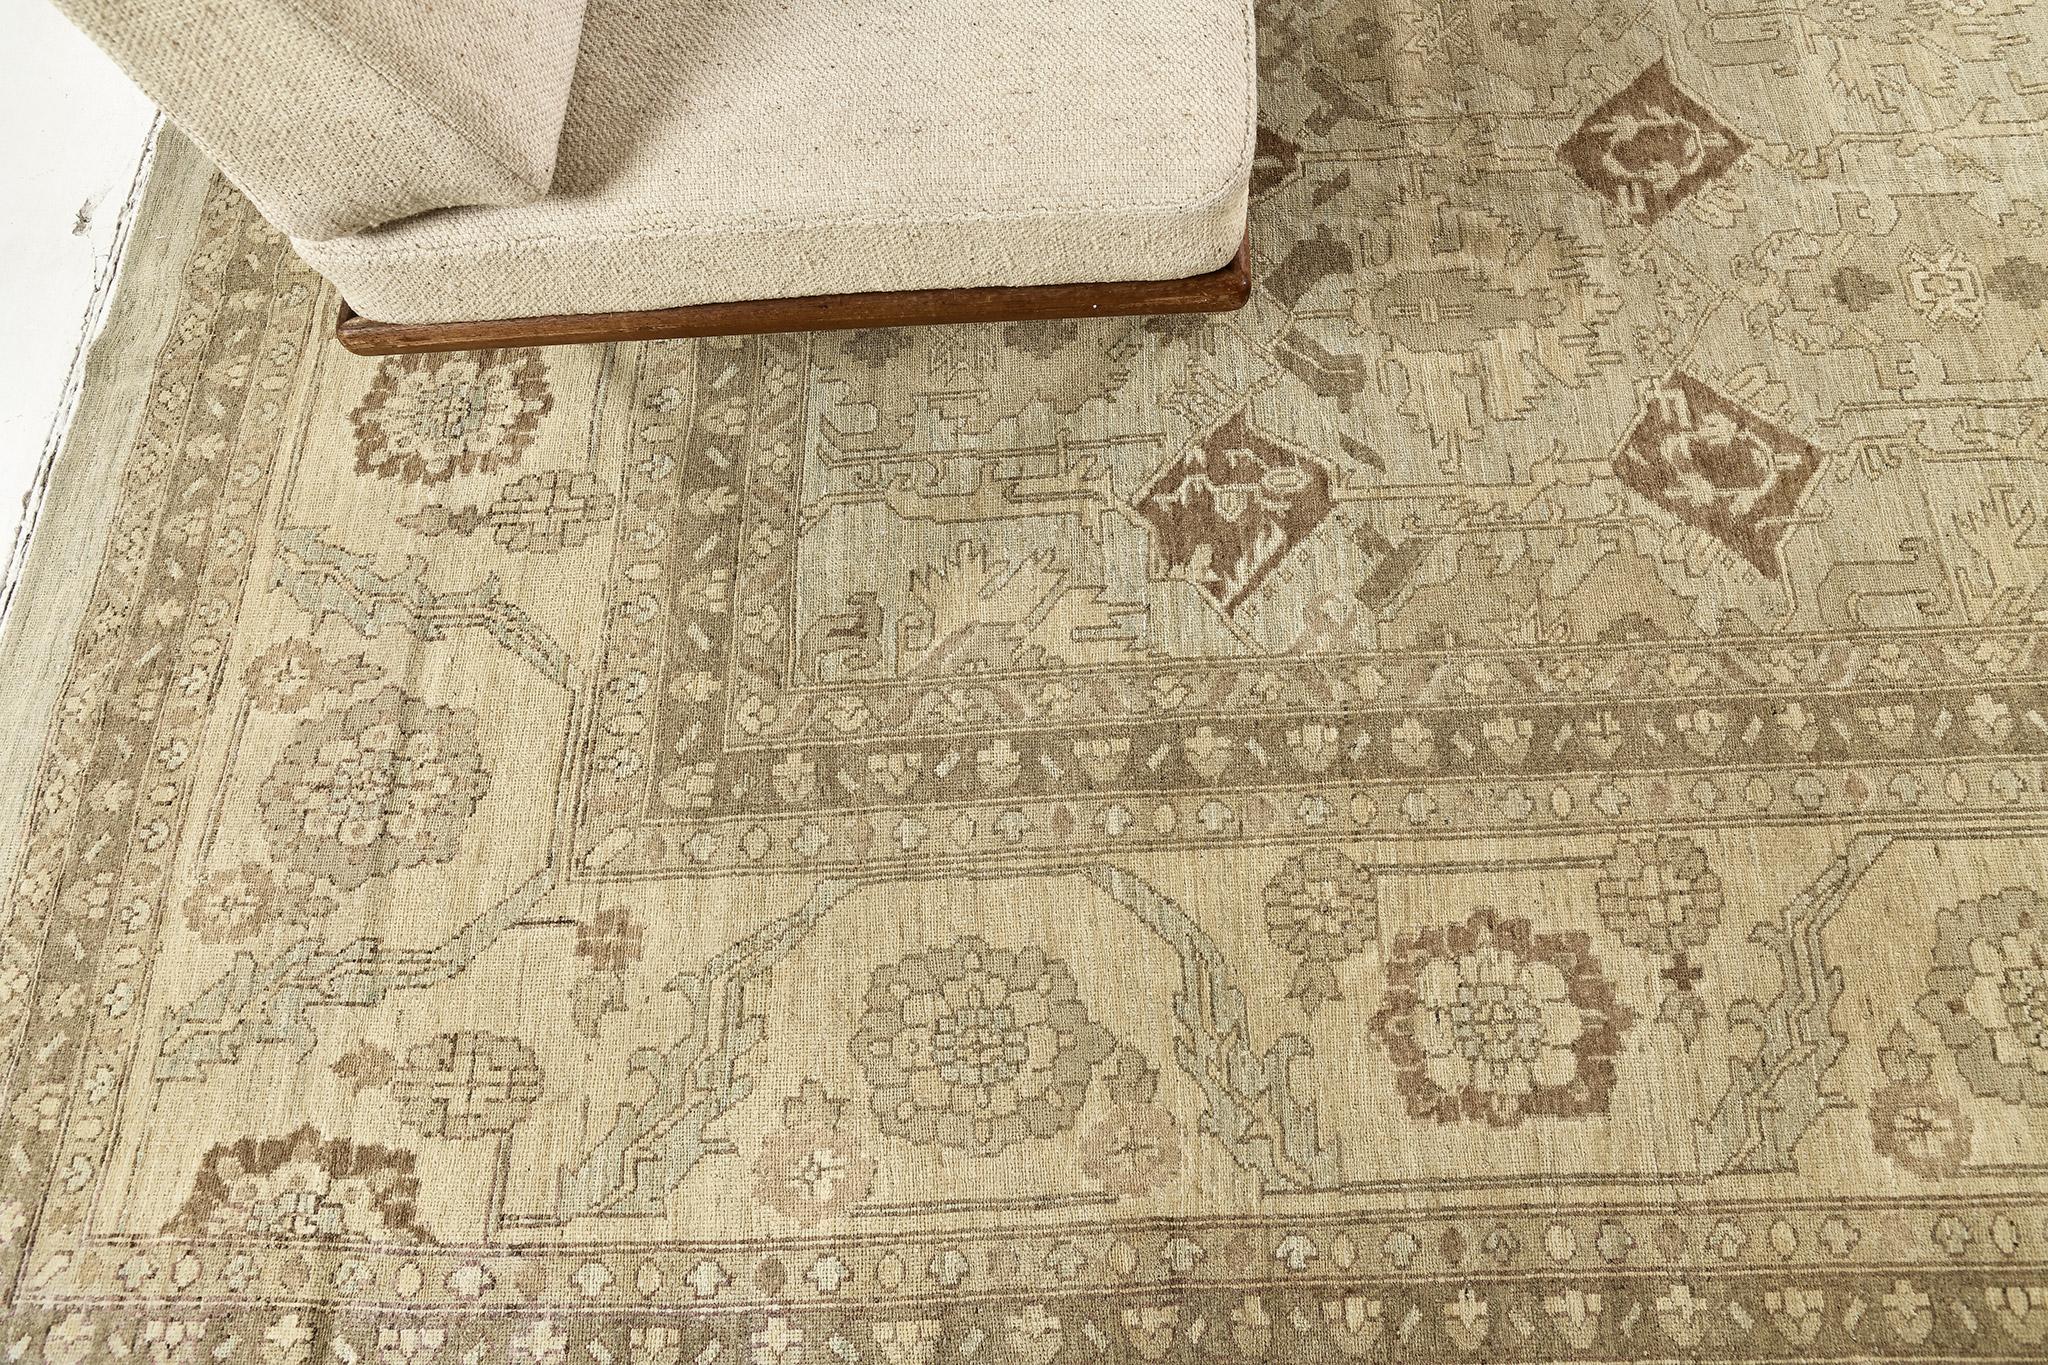 A breathtaking muted revival of Bakhshaish design rug that combines the stunning palmettes and statement vines connected by the leafy tendrils in the shades of sand, dusty blue and brown. This exquisite rug has a magical presence provided by the